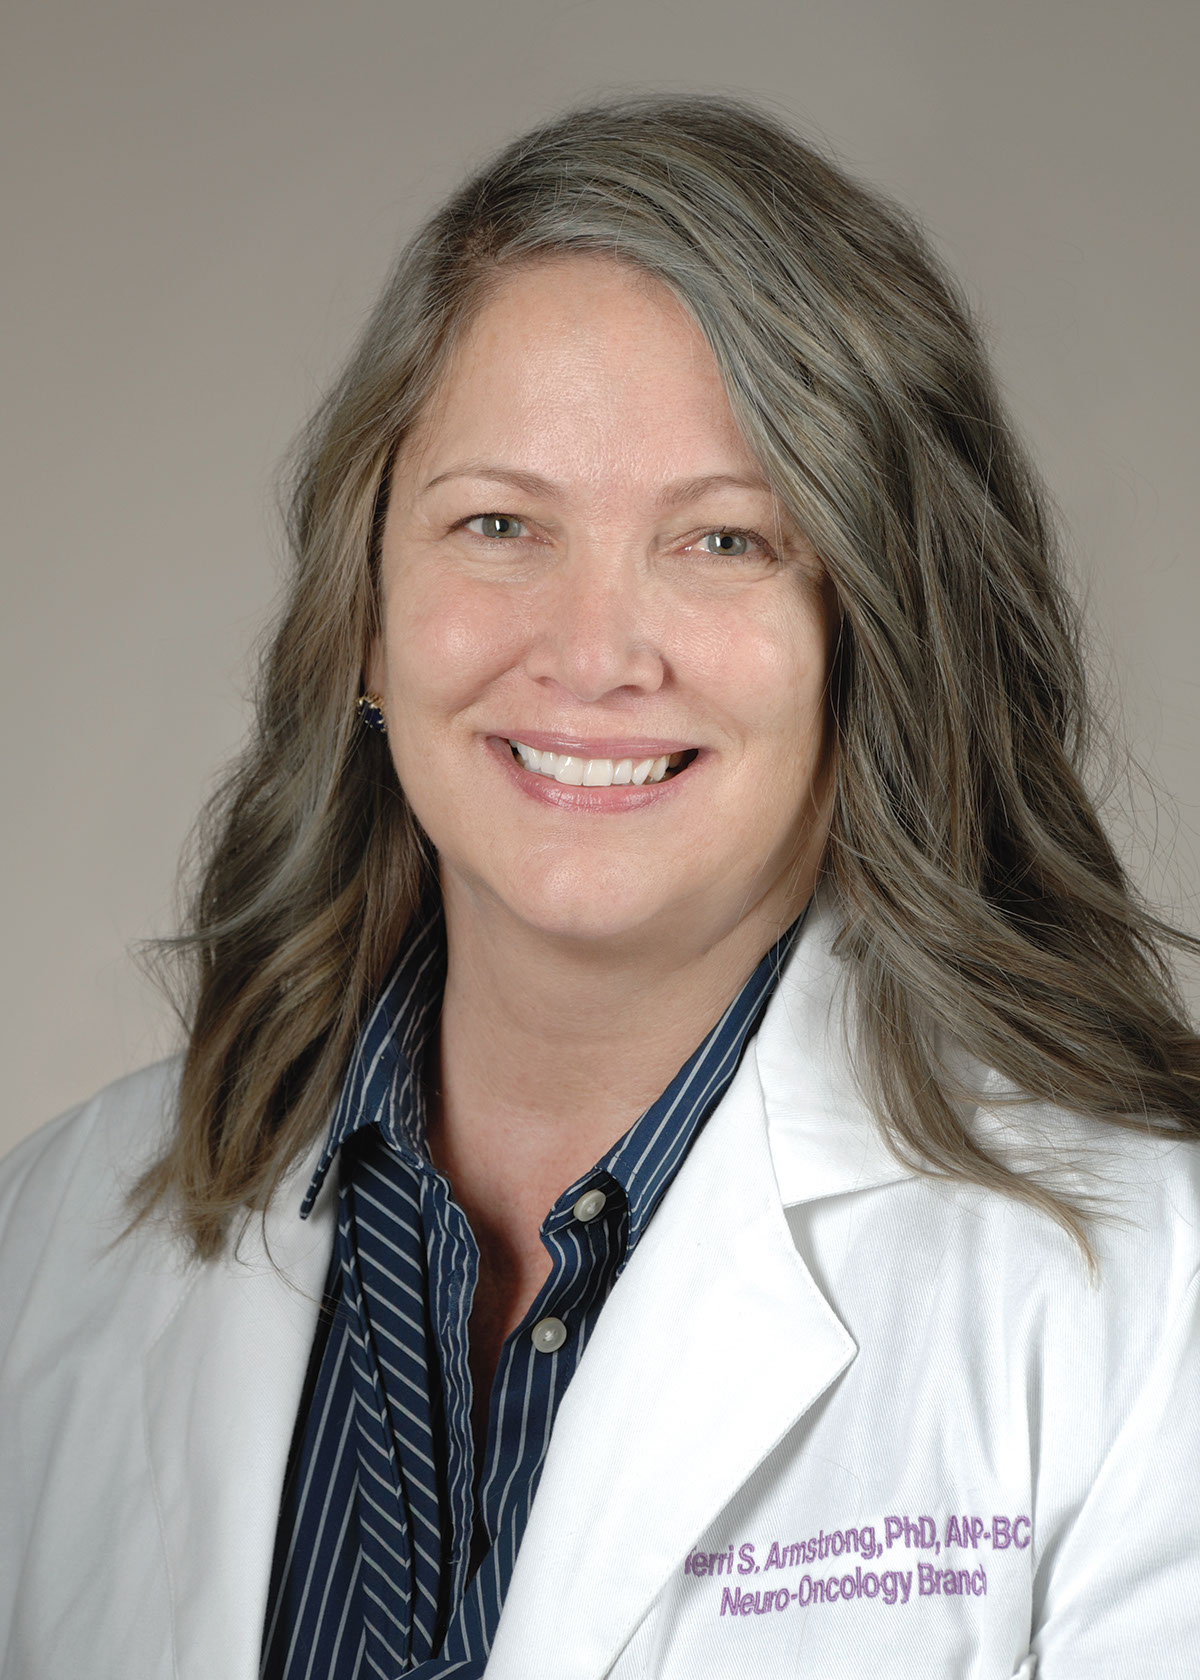 Terri S. Armstrong, PhD, ANP-BC, FAANP, FAAN, is the senior investigator and deputy branch chief of the Neuro-Oncology Branch, Center for Cancer Research at the National Cancer Institute, National Institutes of Health.